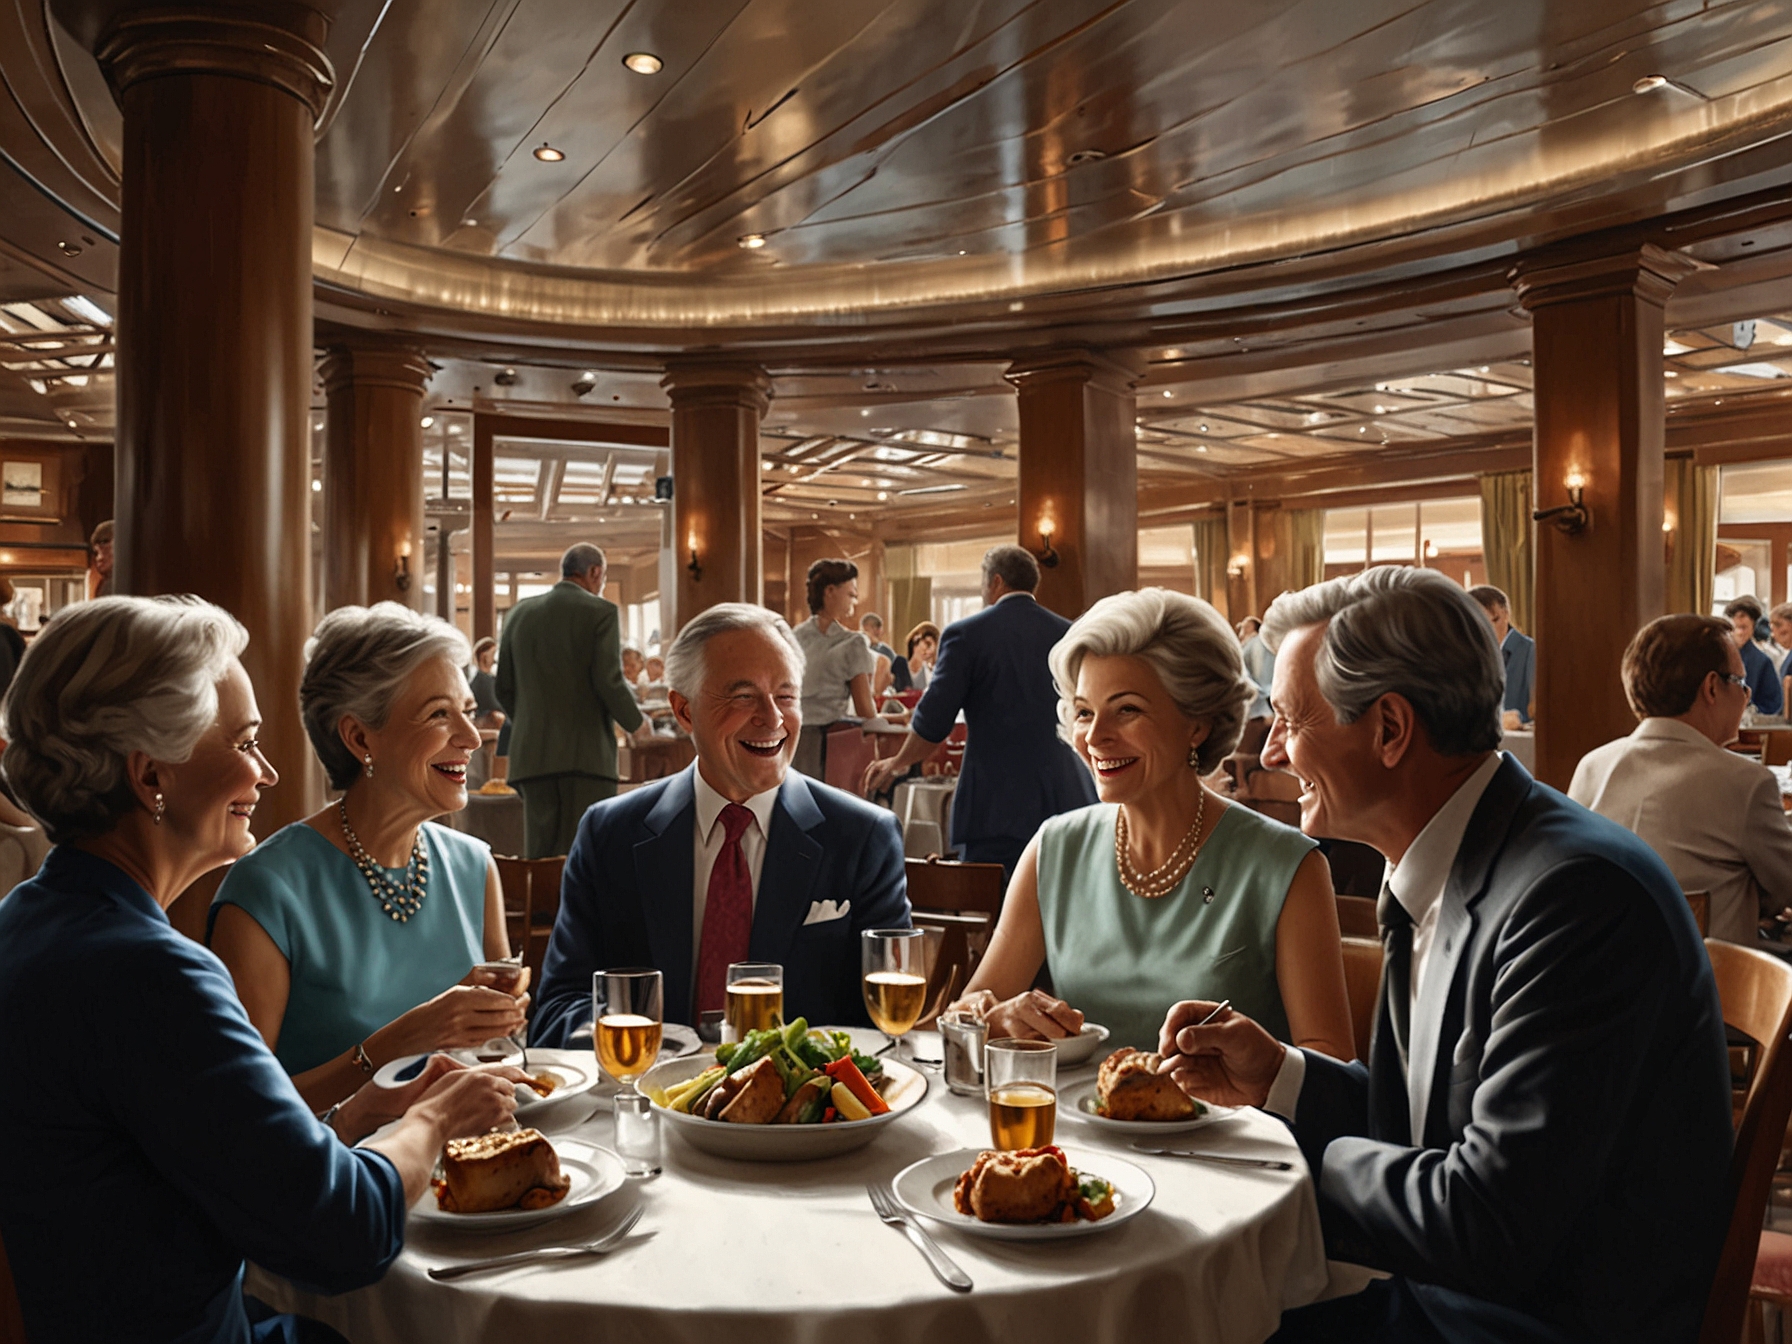 The couple enjoying a gourmet meal in one of the ship's dining halls. They are surrounded by fellow passengers, highlighting the social and lively environment of their retirement lifestyle.